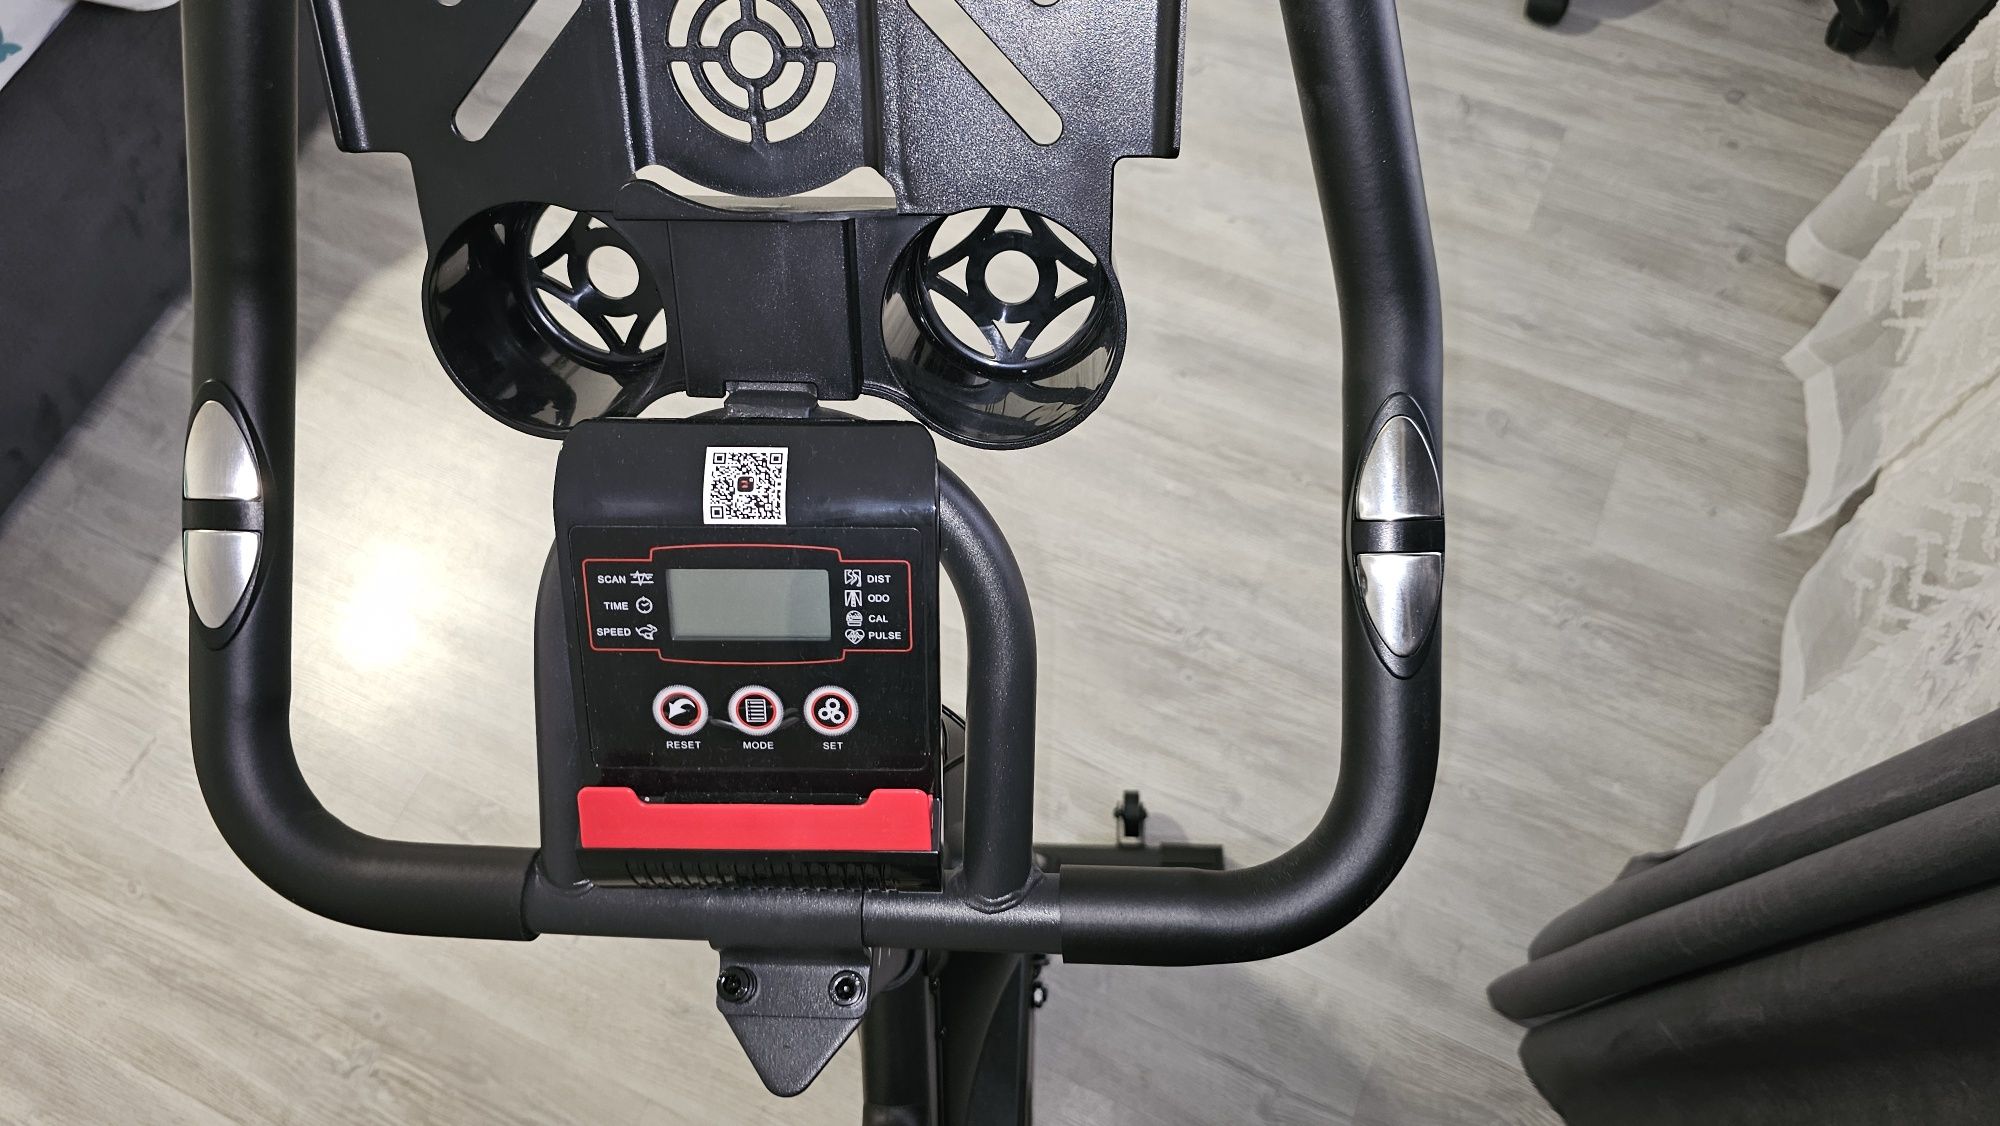 Bicicleta fitness indoor cycling FitTronic SB8000 volant 13 KG